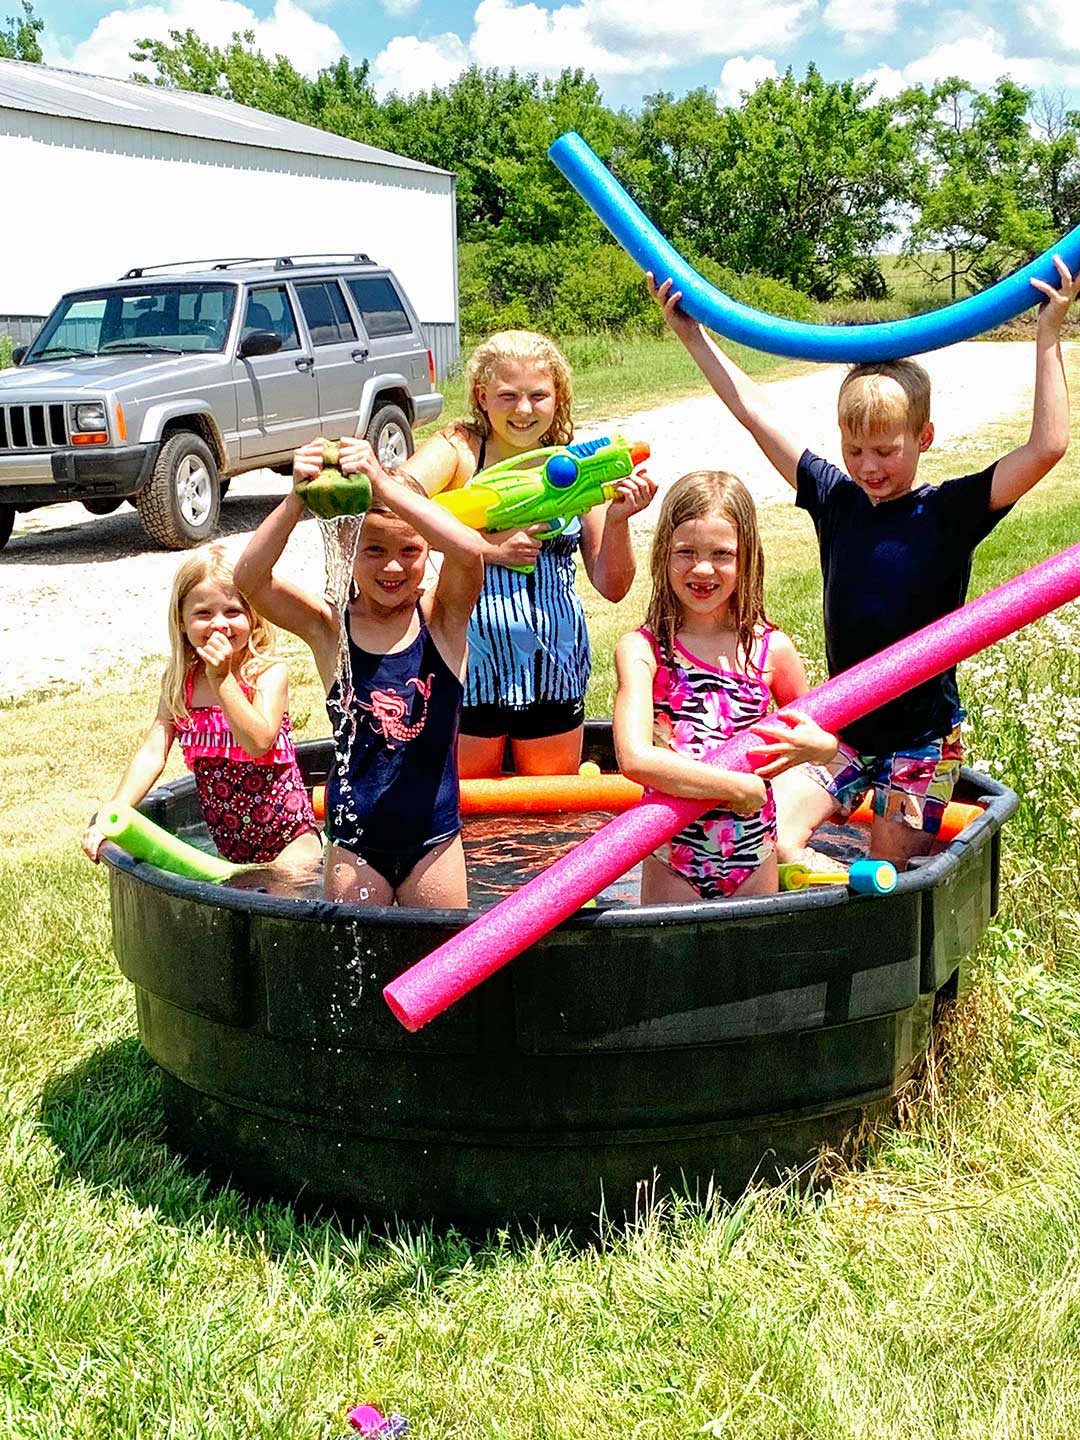 Kids swimming in a tank of water with squirt guns, noodles, and sponges.